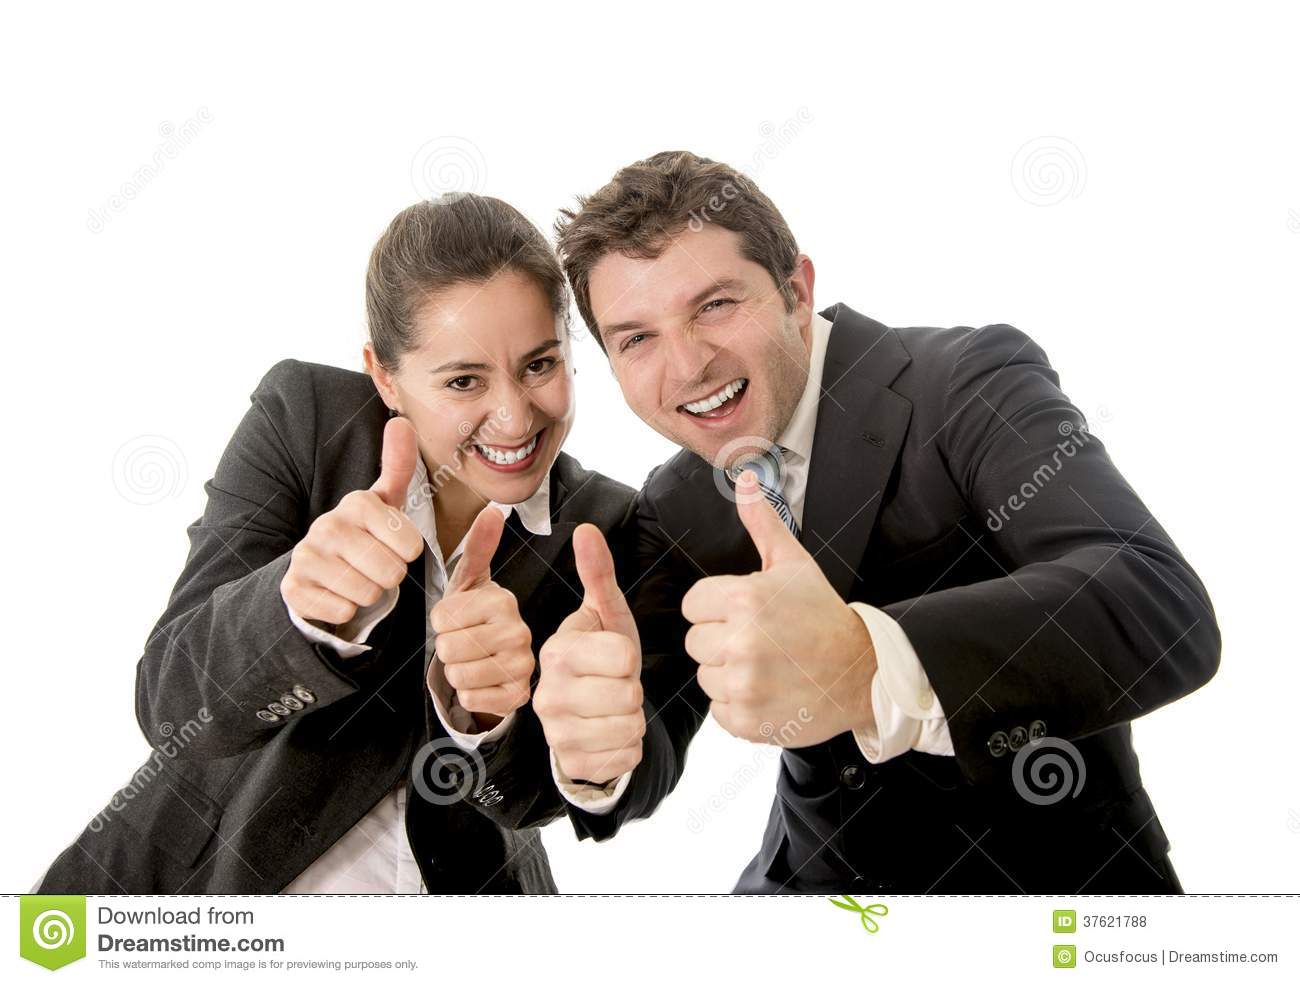 Men and Women Giving Thumbs Up